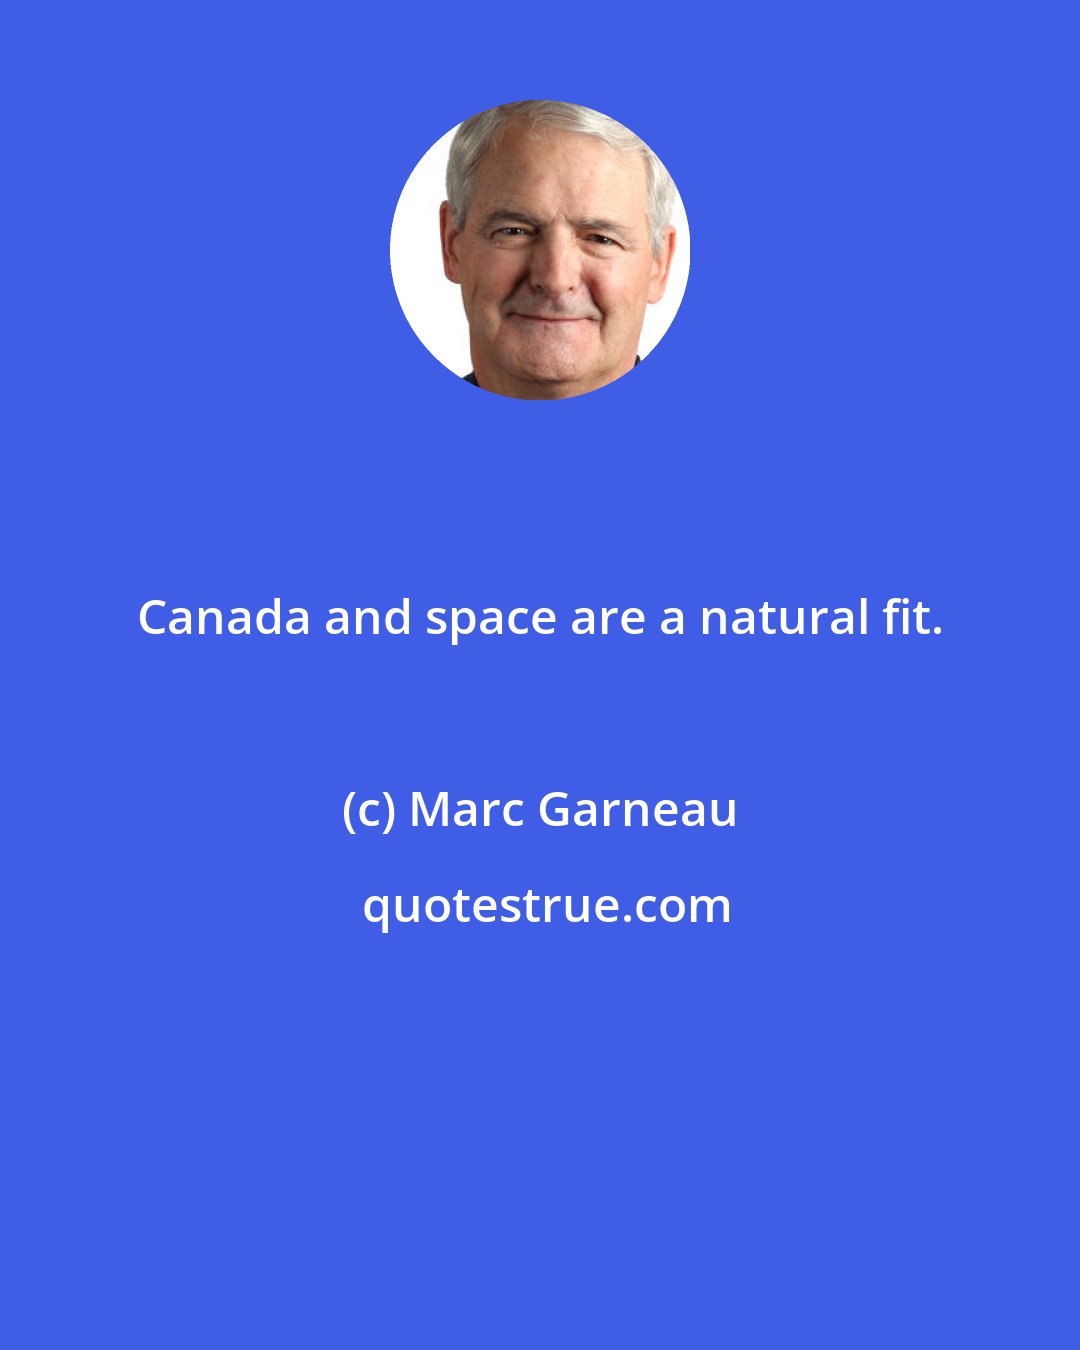 Marc Garneau: Canada and space are a natural fit.